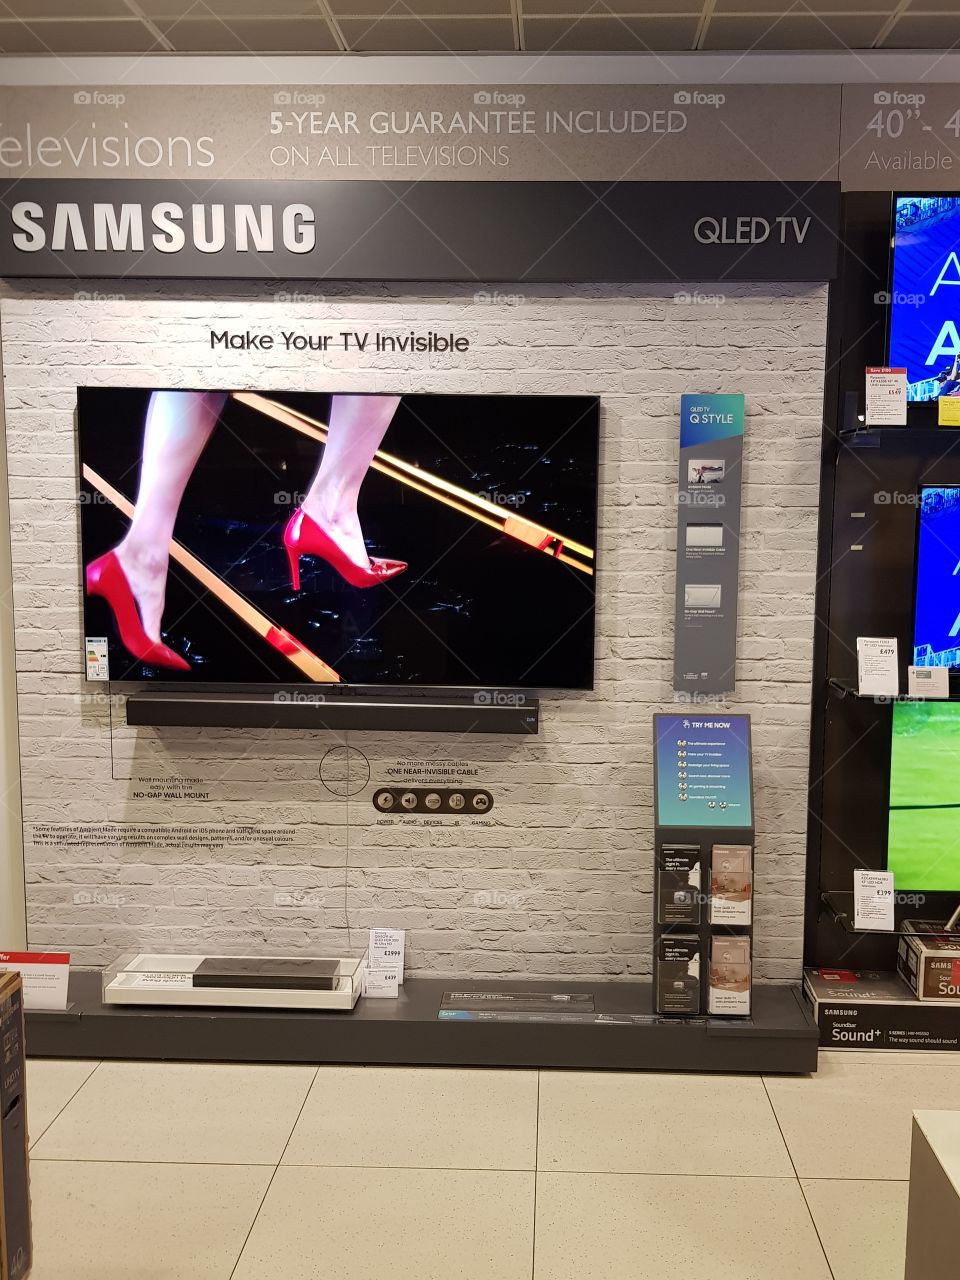 Samsung ambient mode 4K UHD TV QLED television with soundbar wall mounted display at Peter Jones Sloane square Chelsea King's road London